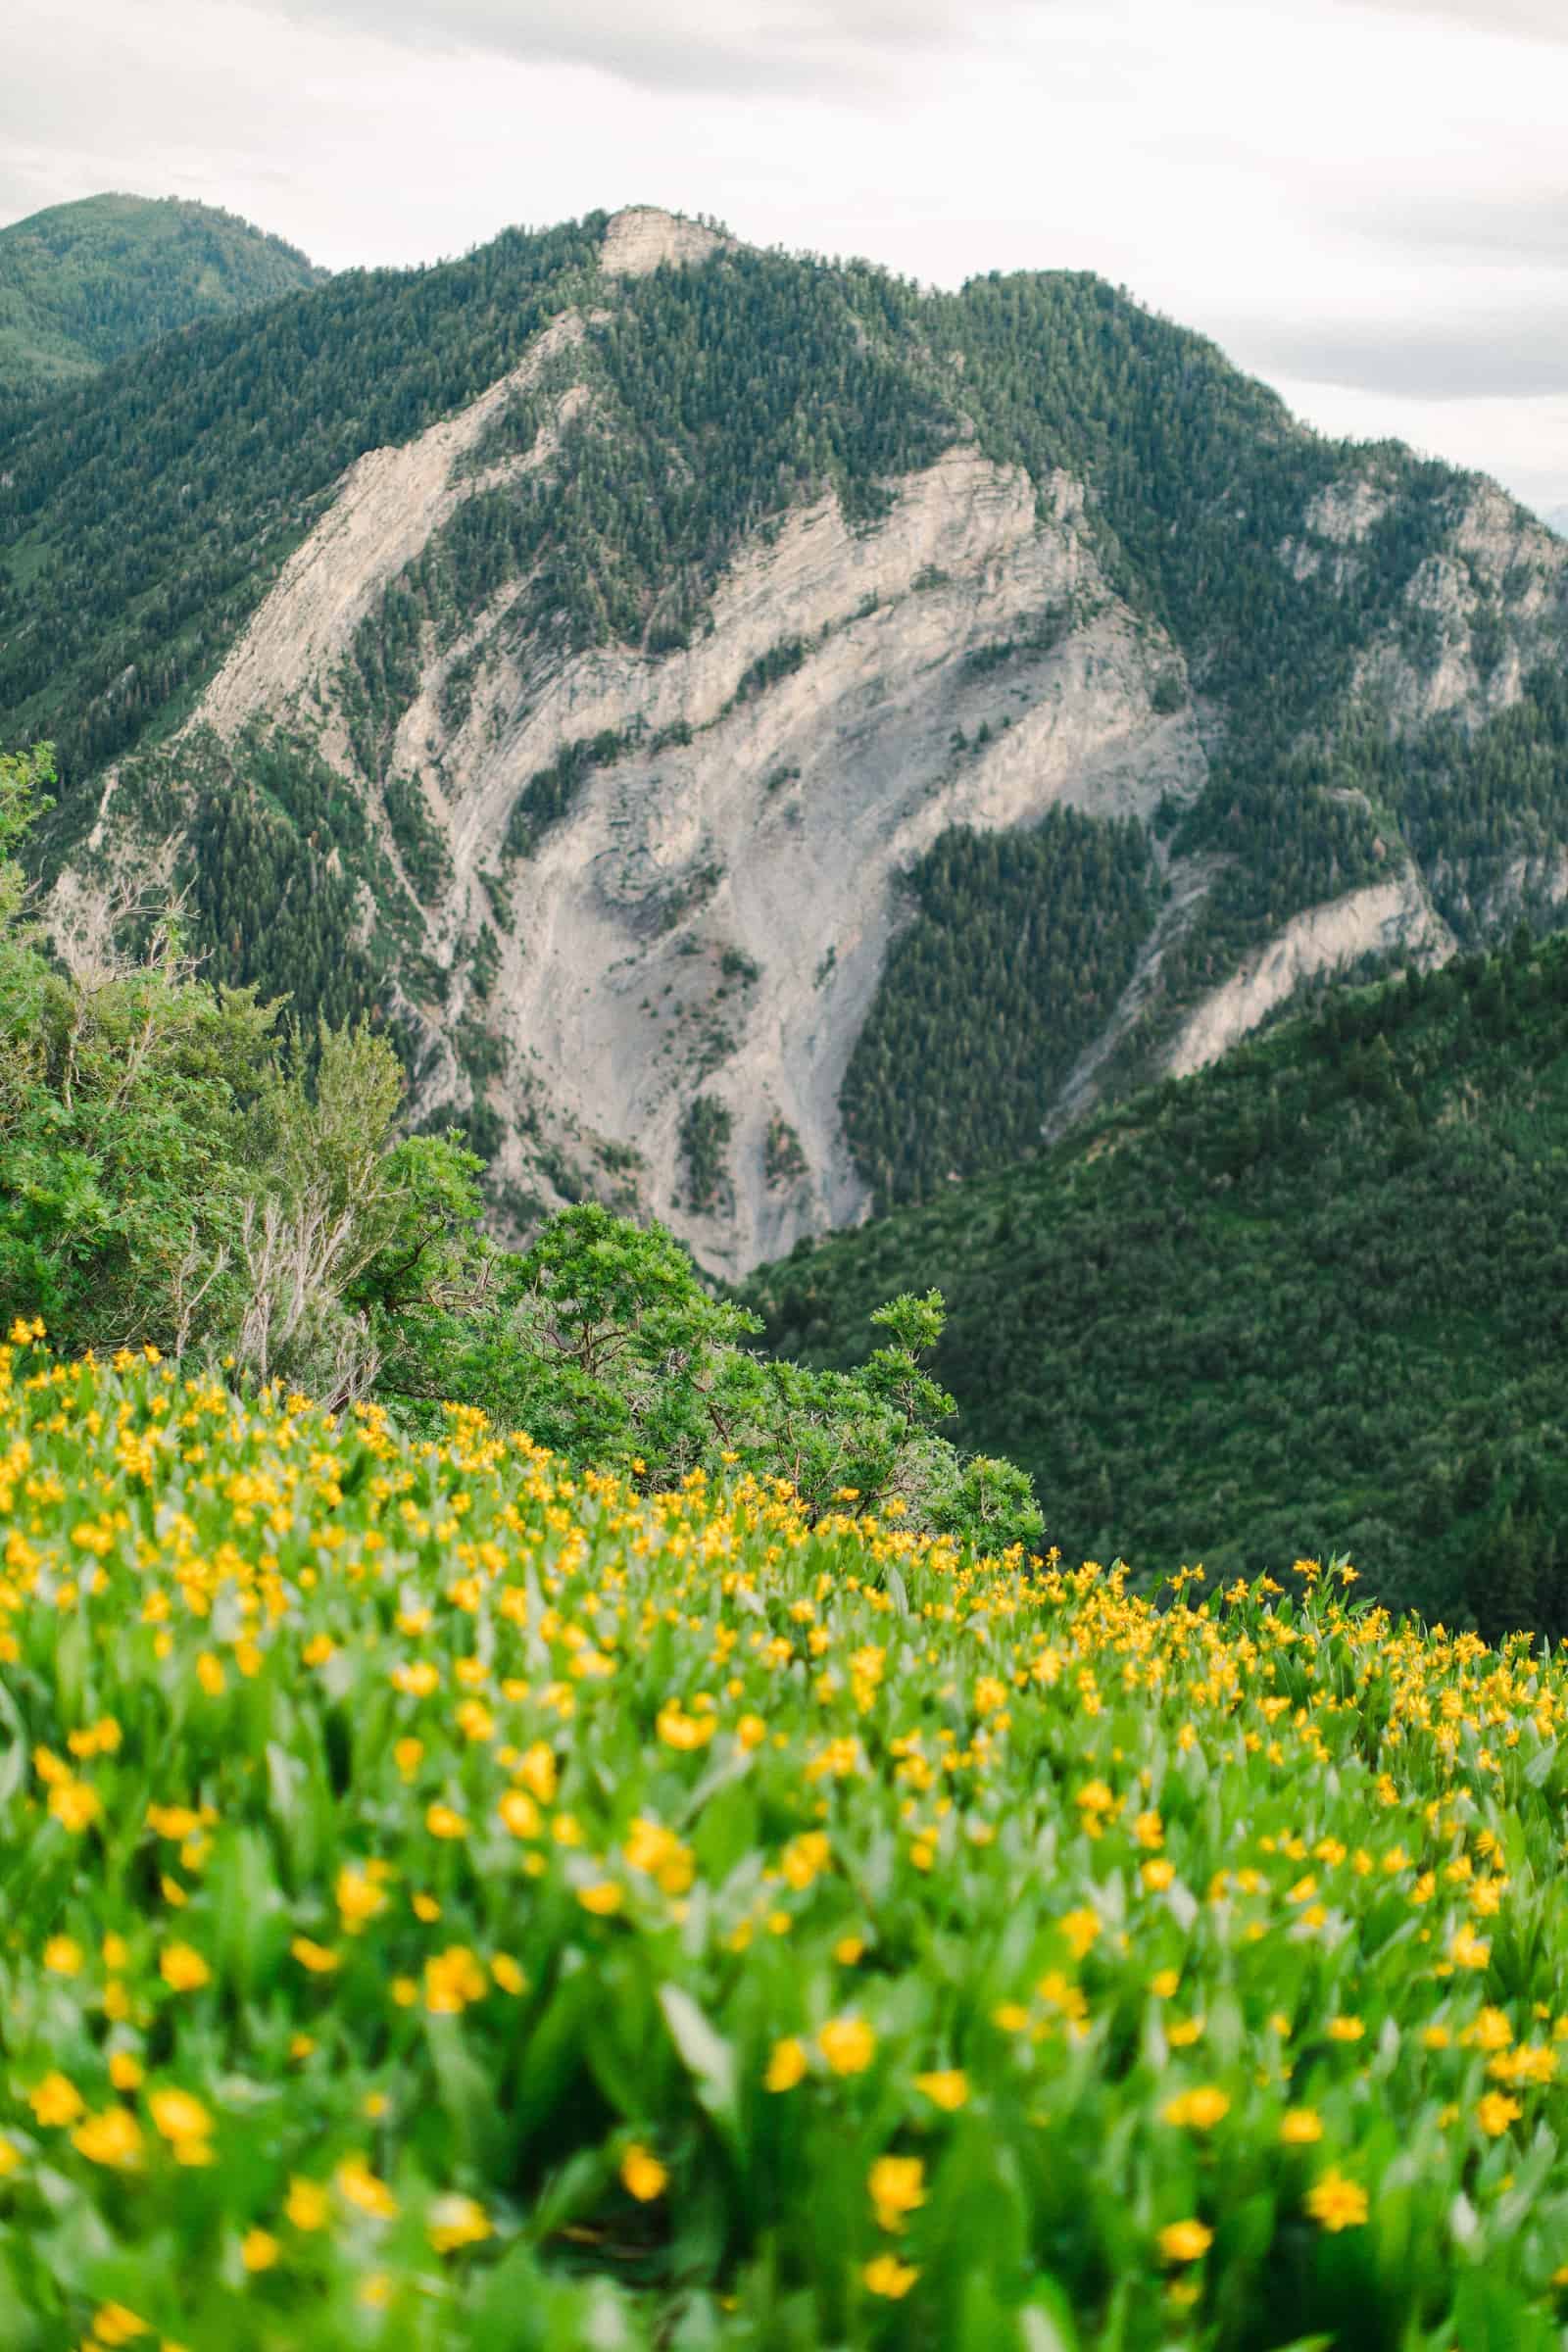 Provo Canyon wildflowers field engagement session, Utah wedding photography, mountain field with yellow flowers